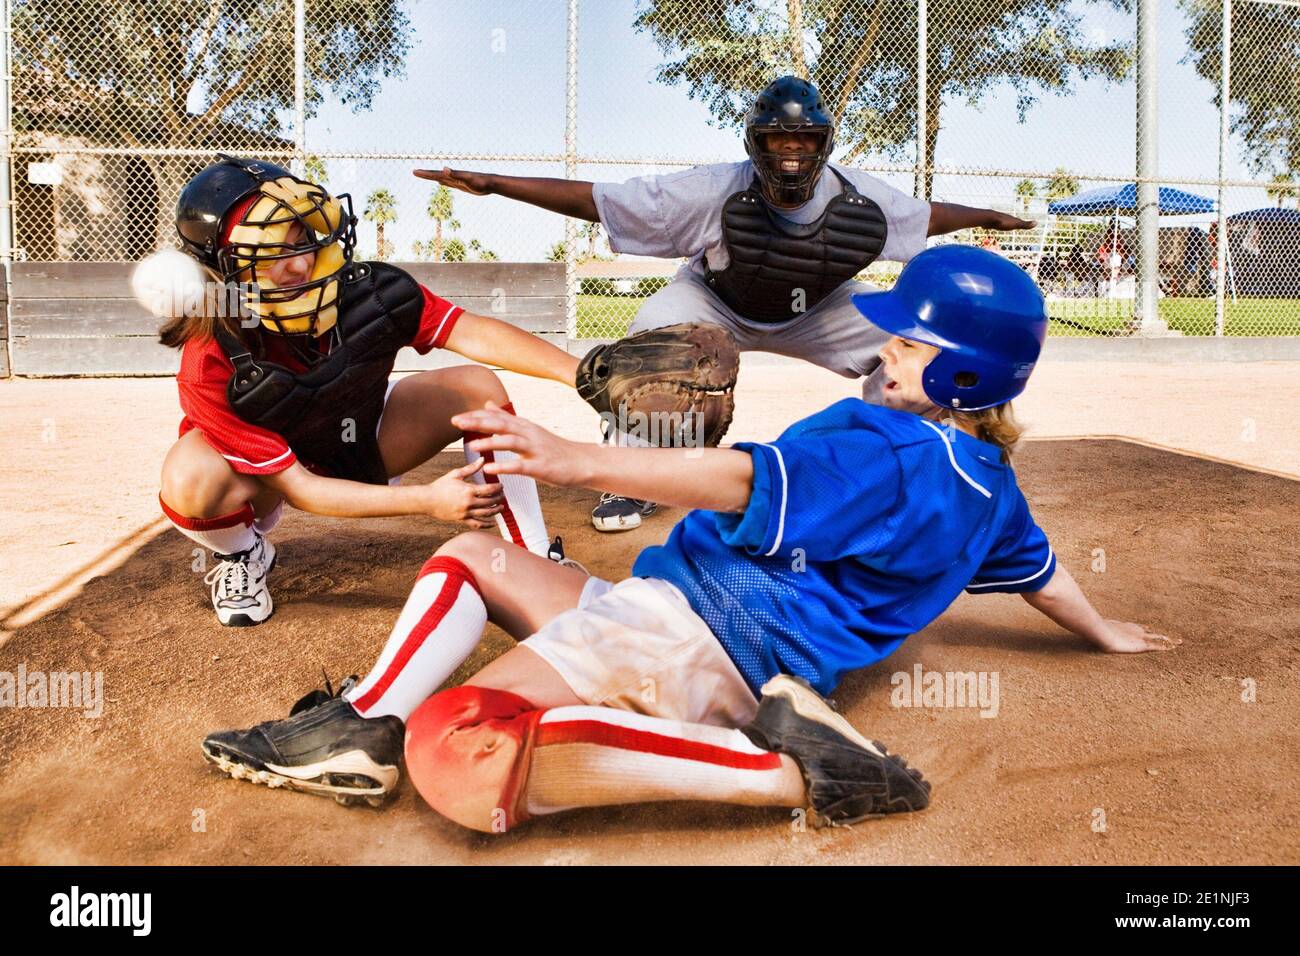 Portrait of Softball player sliding into home plate while umpire rules safe Stock Photo